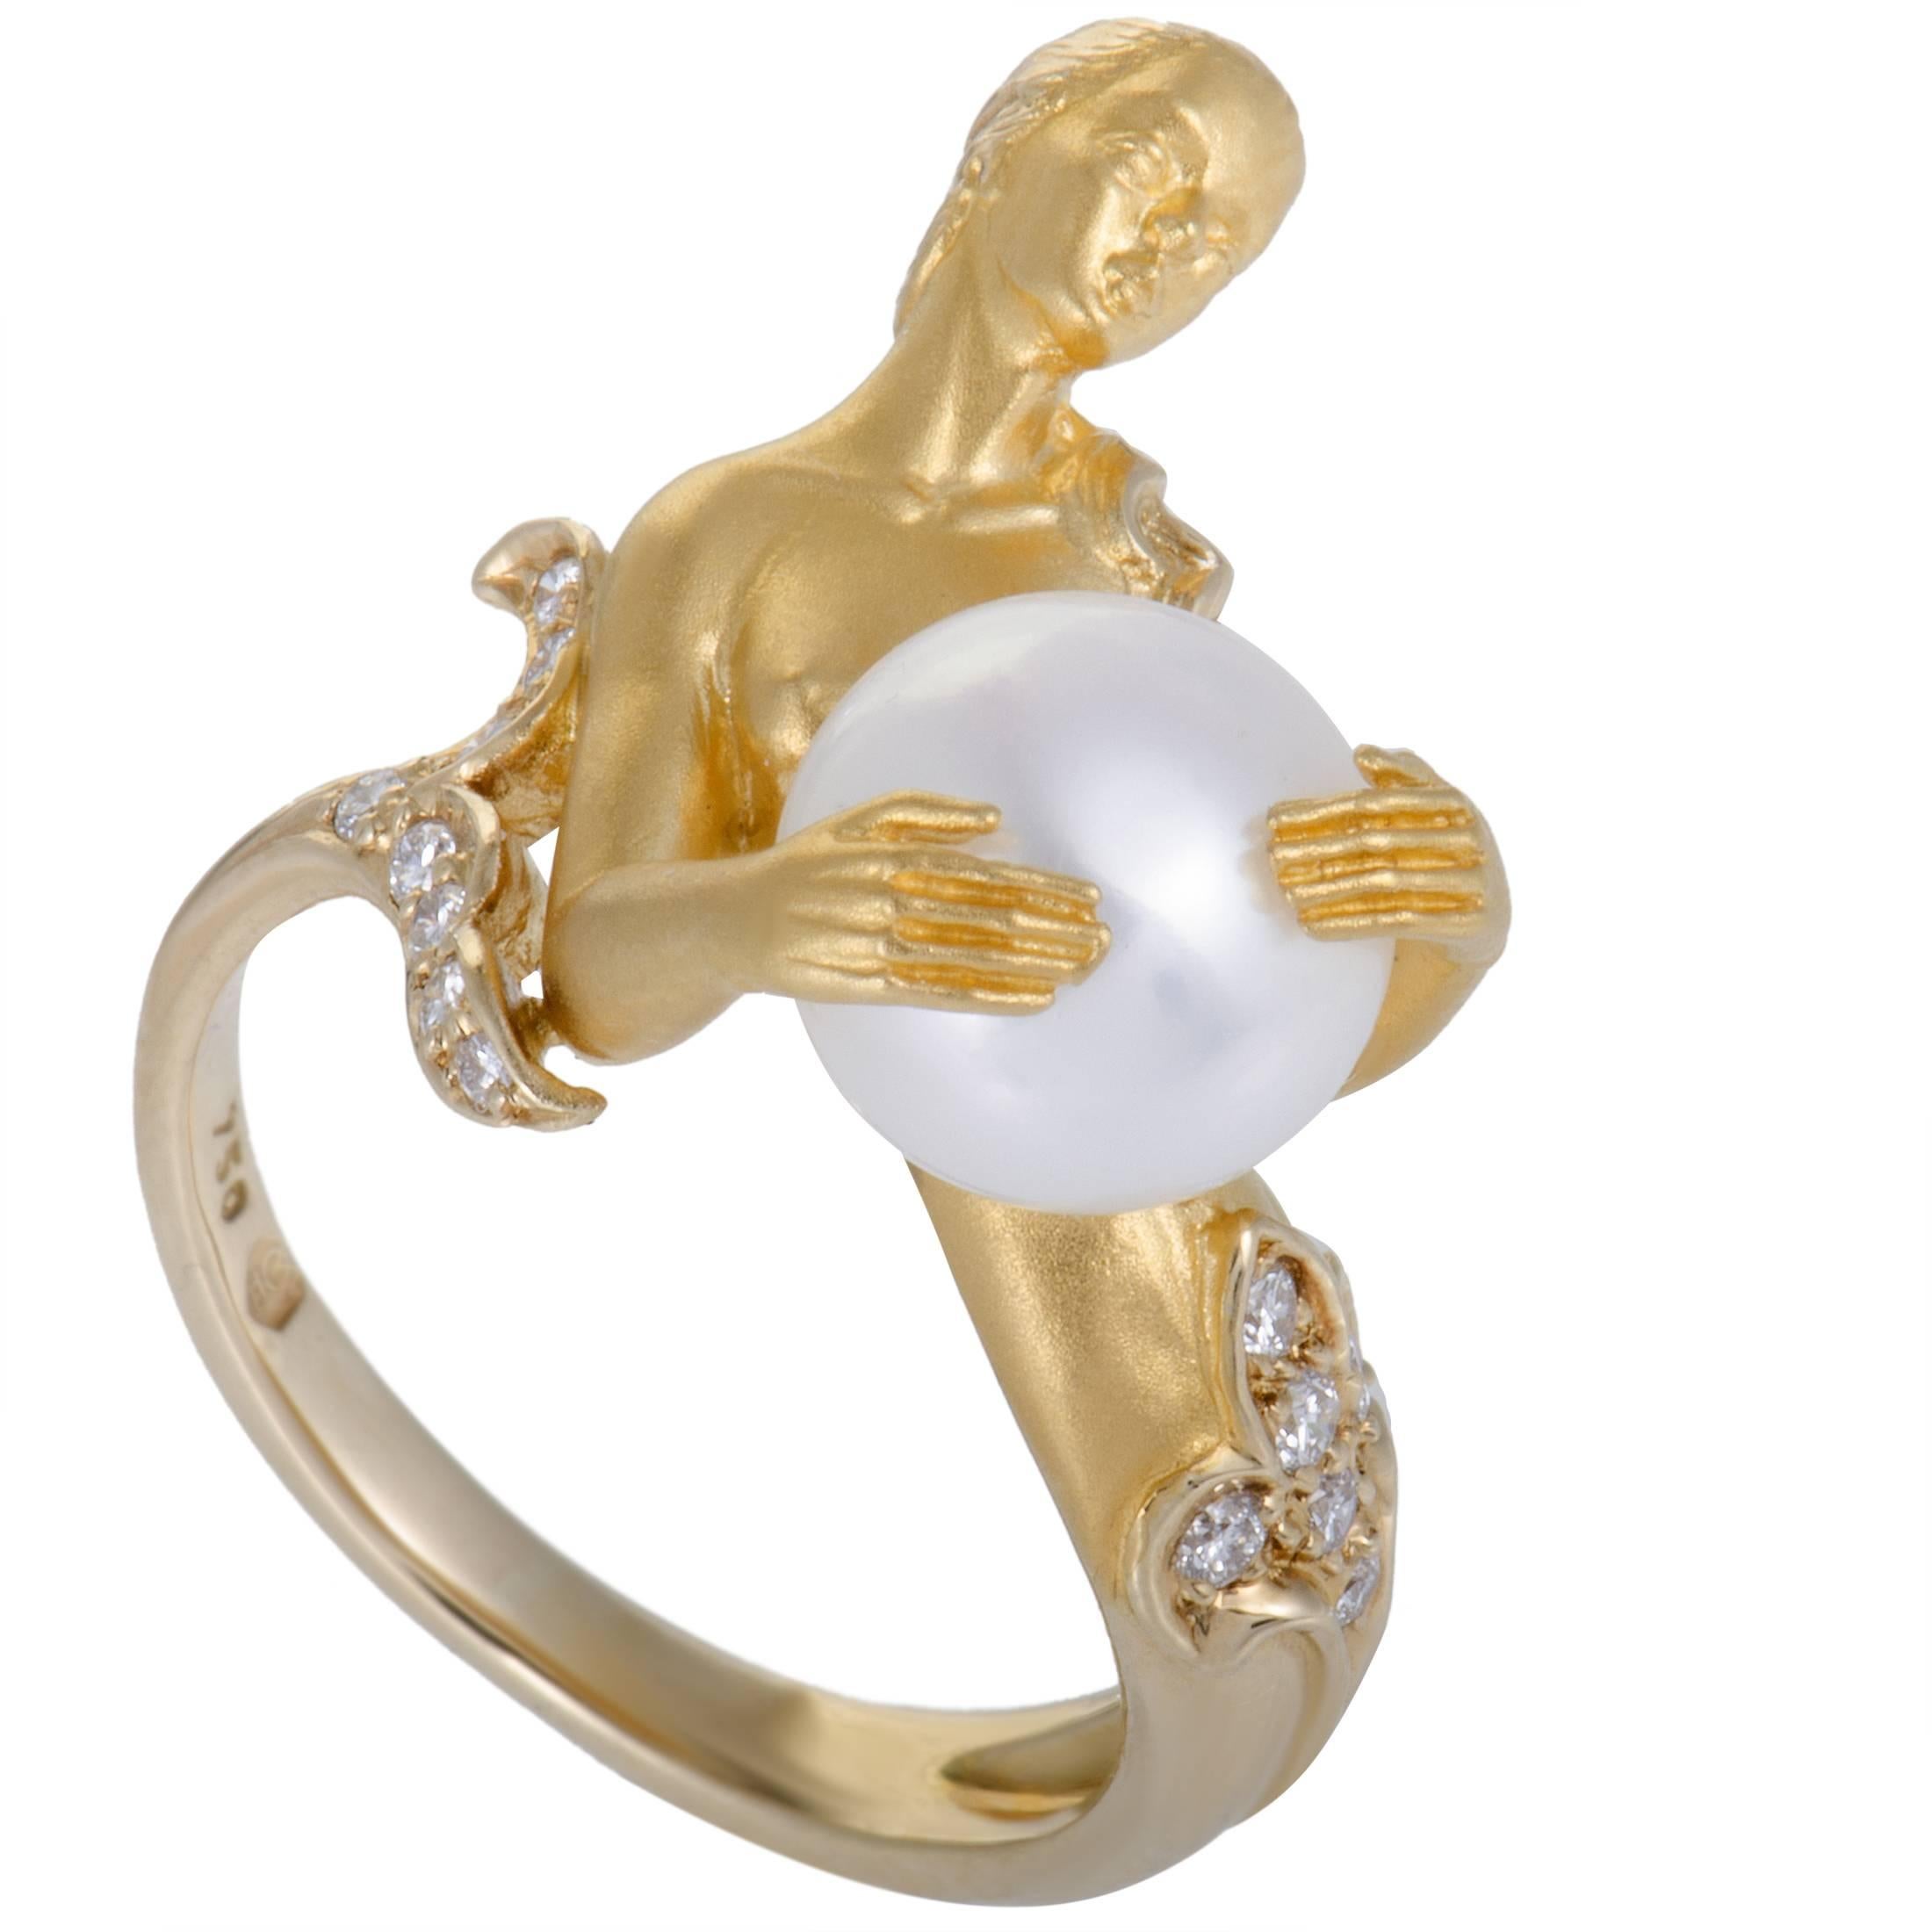 The iconic Carrera y Carrera design renowned for its sublime feminine appeal is featured in this gorgeous ring made of 18K yellow gold. The ring is embellished with 0.15 carats of diamonds and also boasts a spellbinding white pearl.
Included Items: